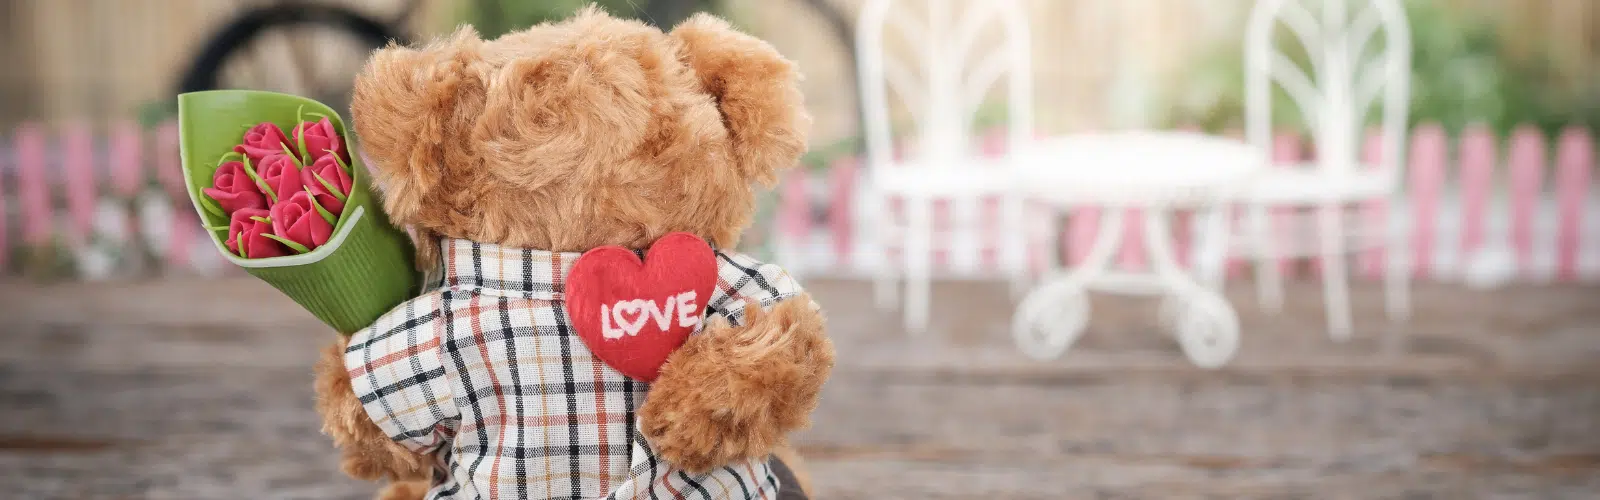 Valentine's Day: 8 ideas for activities to celebrate love with children!